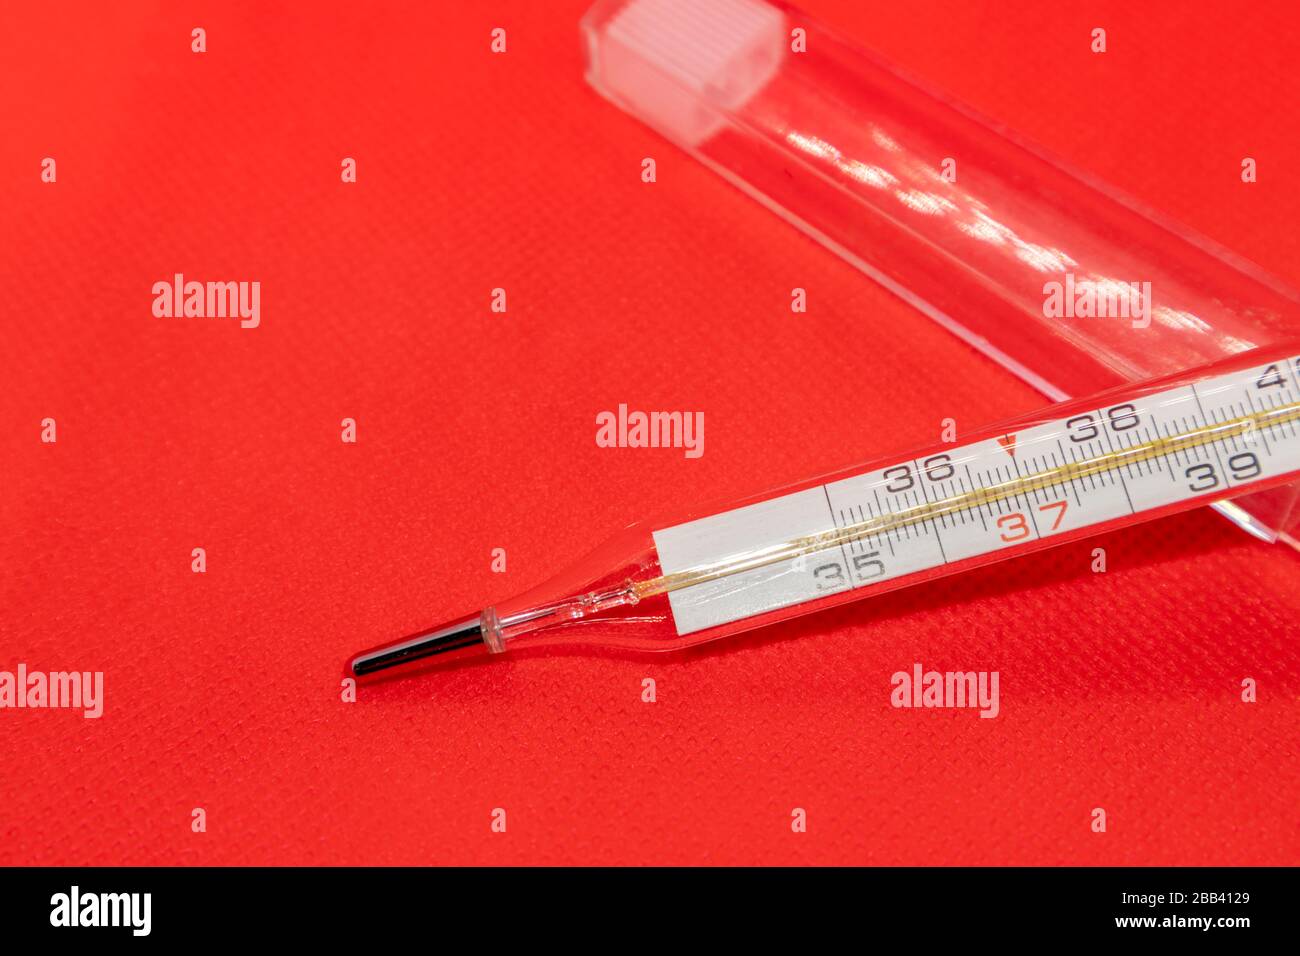 File:Medical mercury thermometer with velvet-lined cardboard box - focus  stack (2020-05-25).jpg - Wikimedia Commons